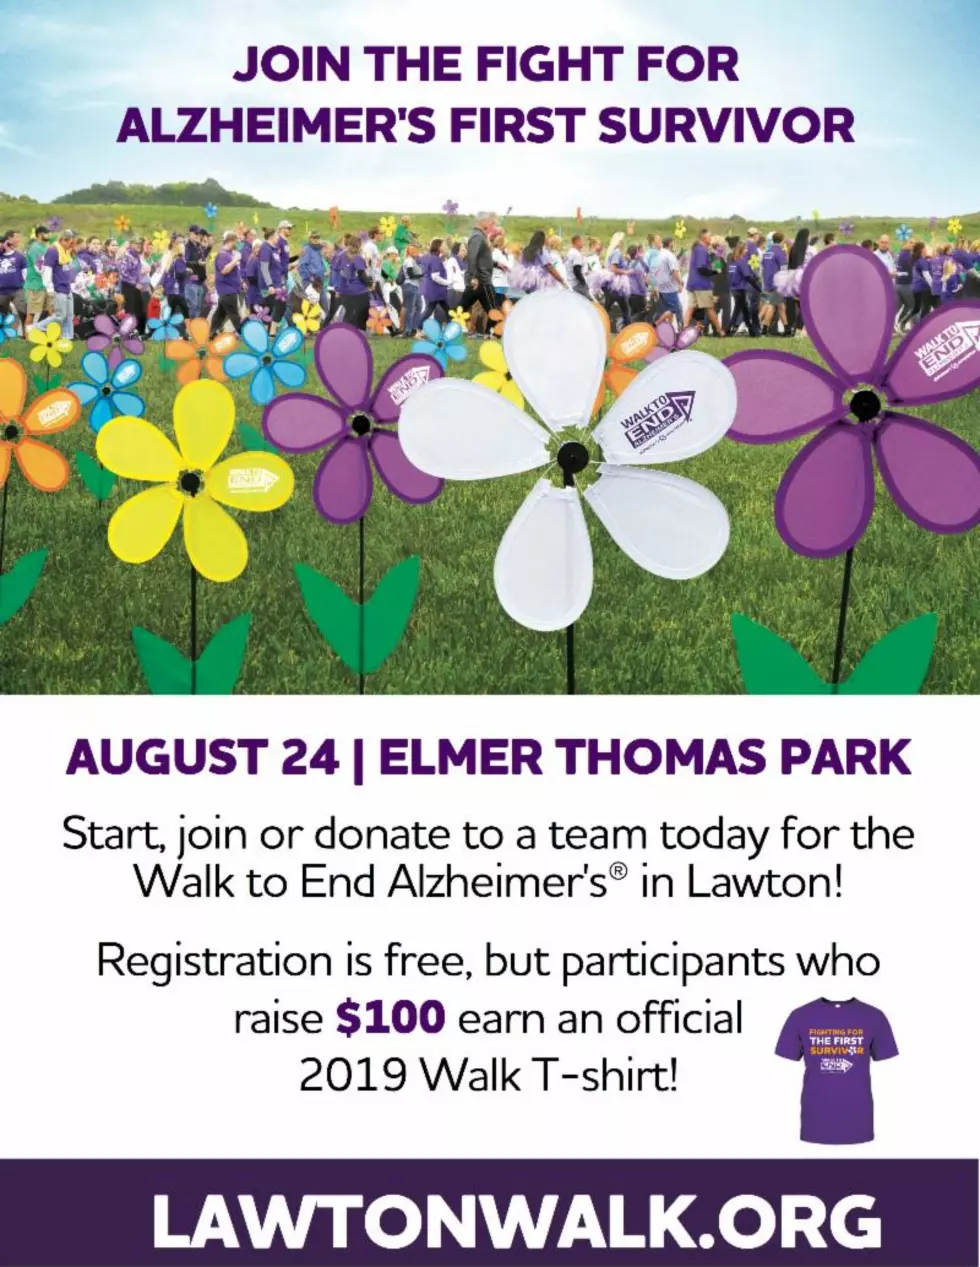 The 2019 Walk to End Alzheimer’s